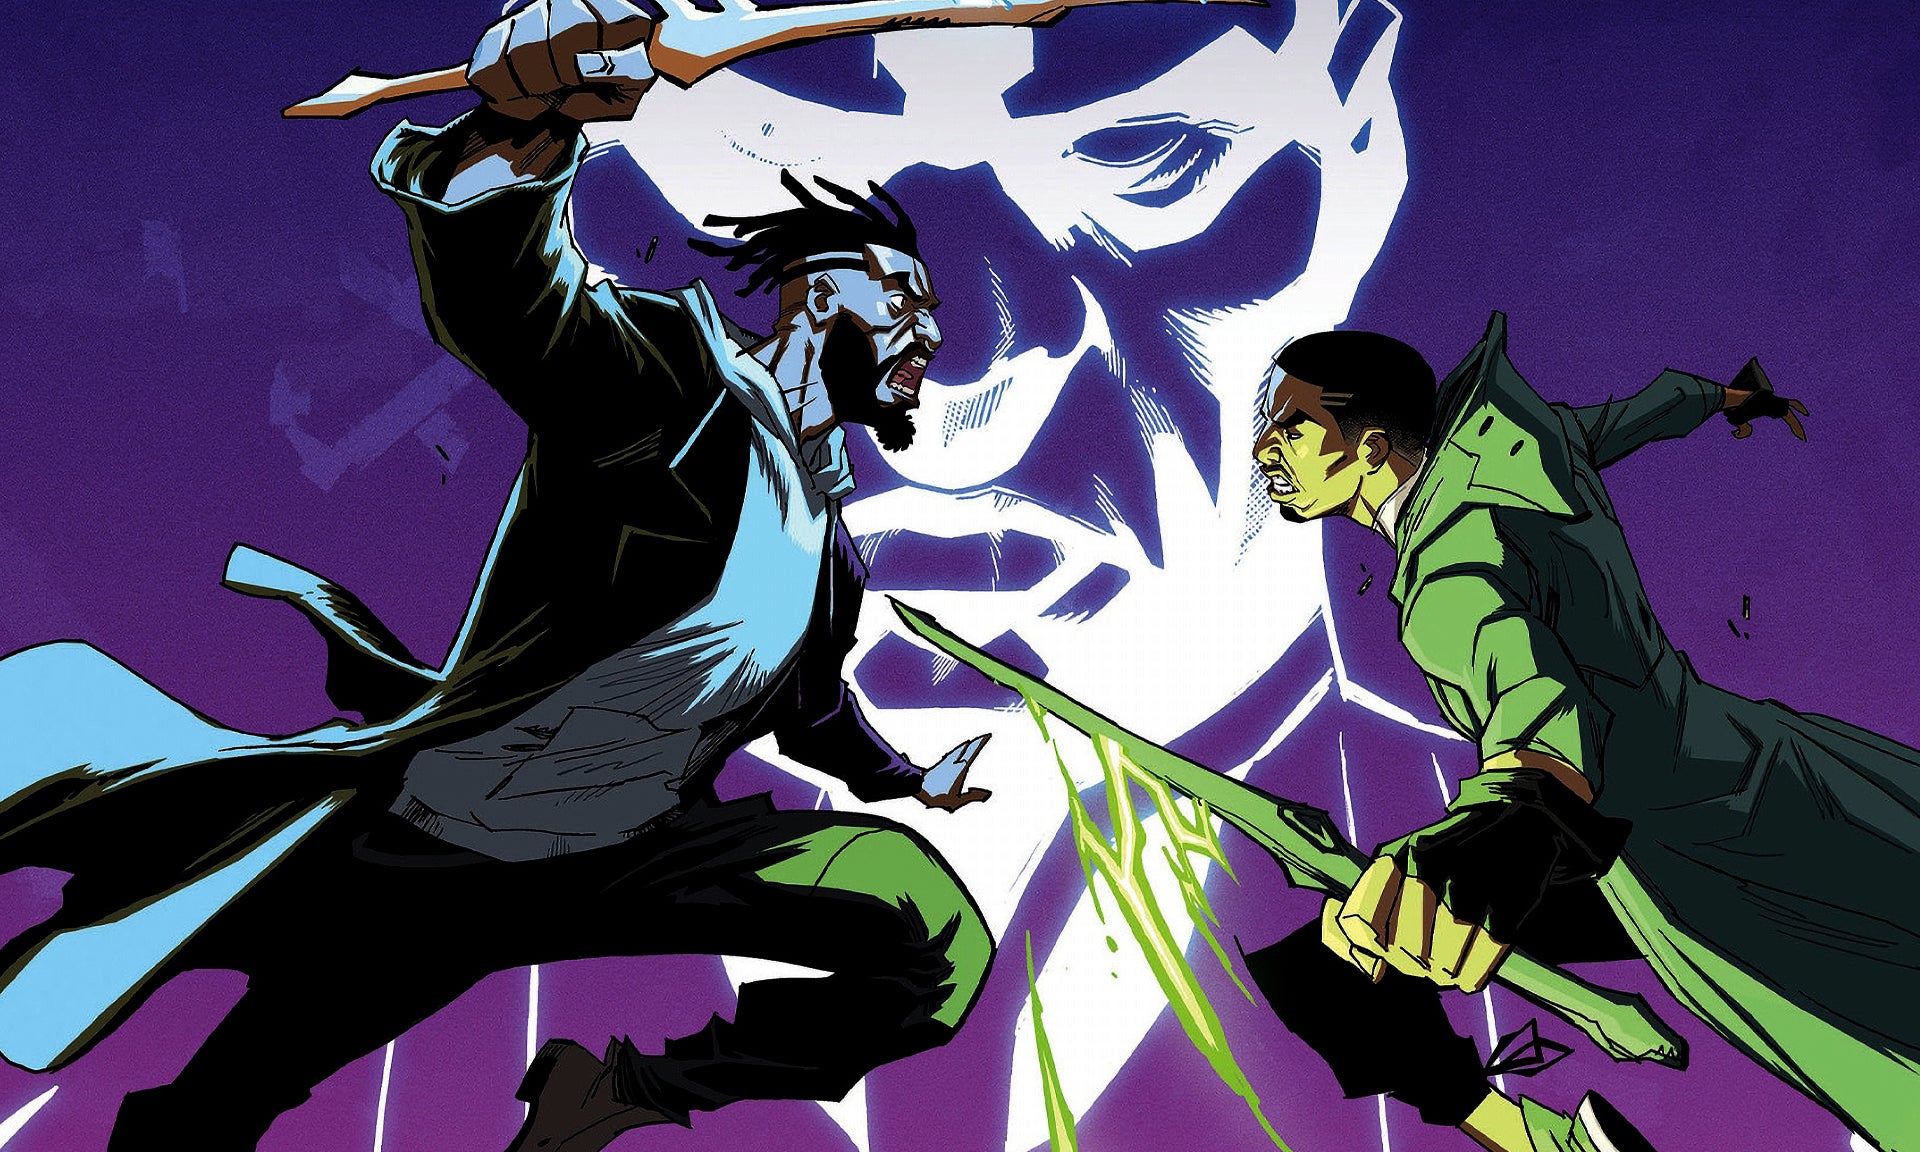 Illustration of two figures fighting with staffs, lit in blue and green against a purple background